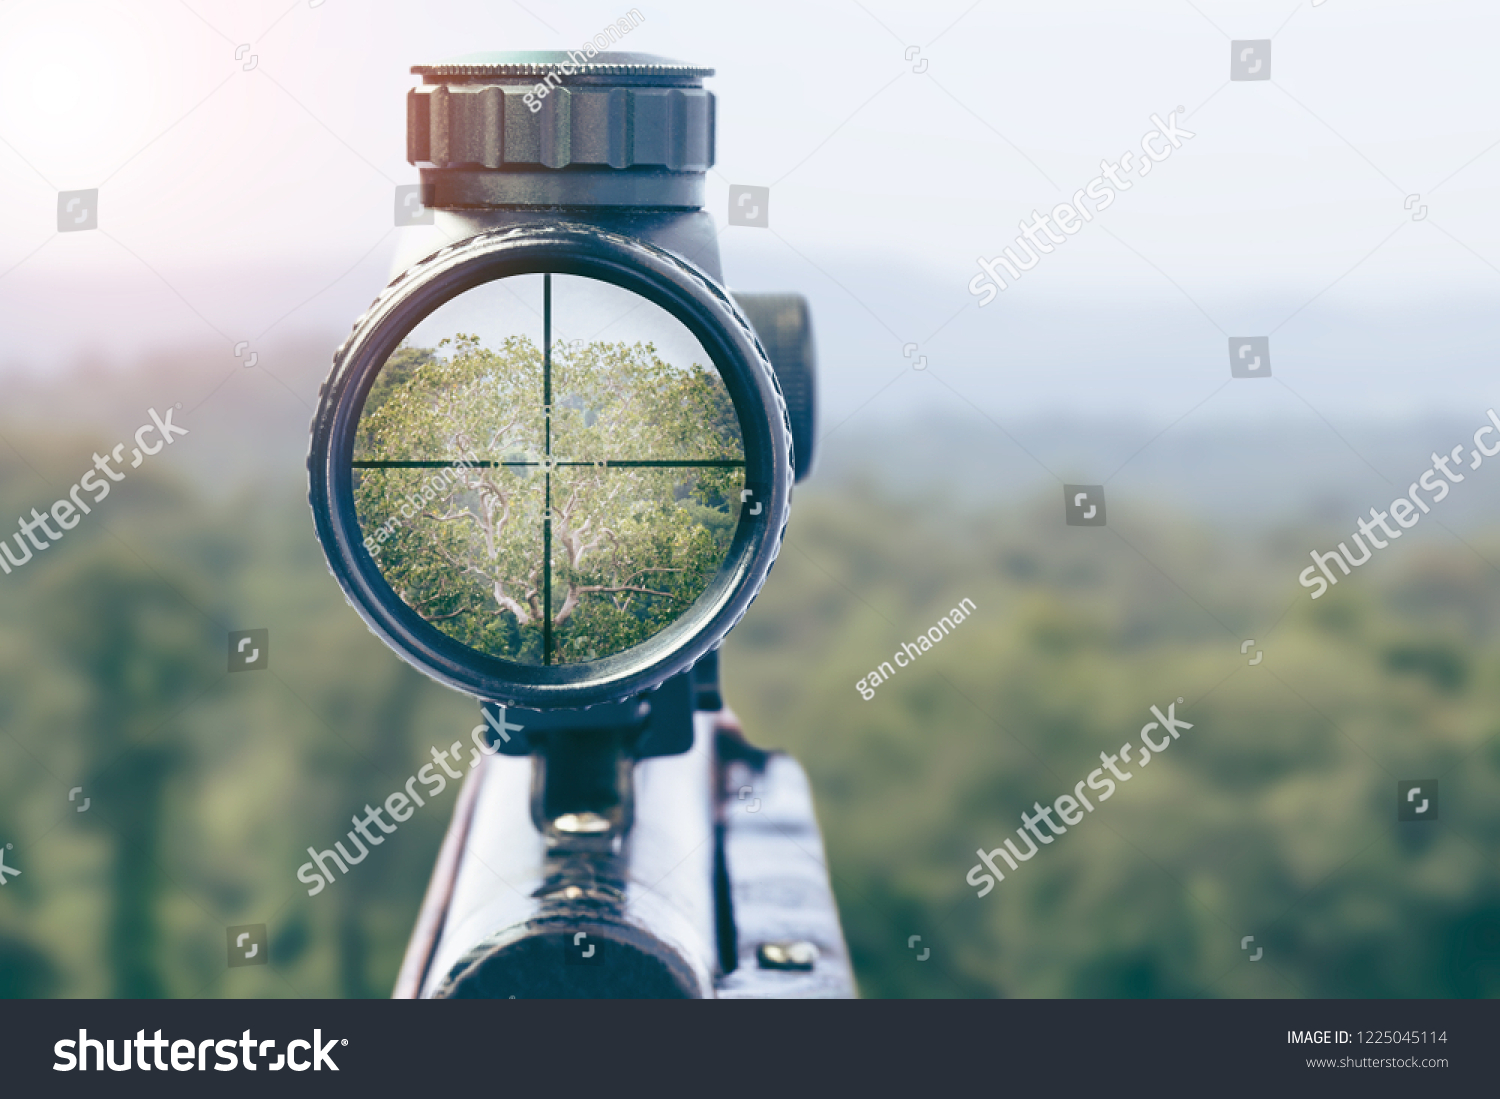 rifle target view on Natural Background. Image of a rifle scope sight used for aiming with a weapon #1225045114